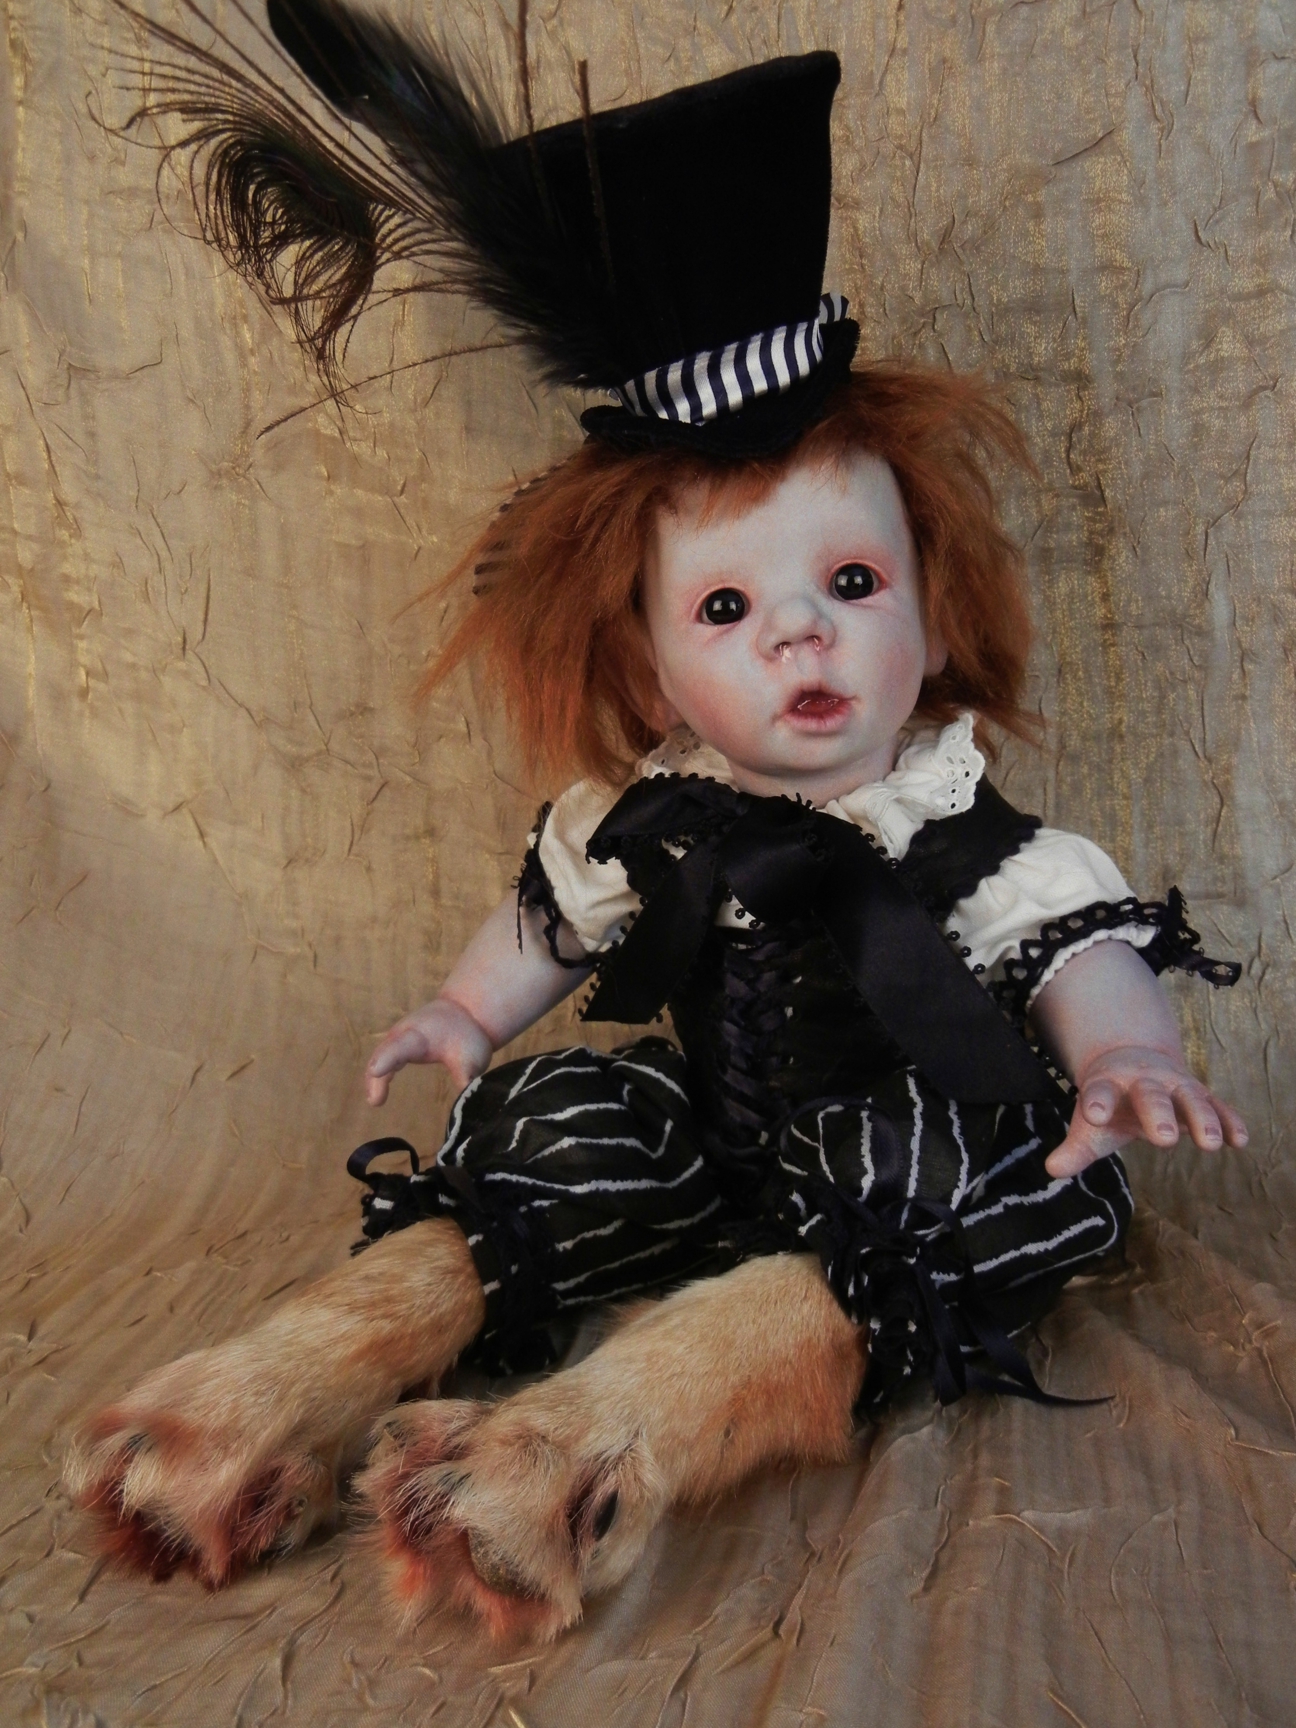 mixed media artdoll porcelain doll red hair repainted face wears feathered top hat and bloomers taxidermied feet sitting